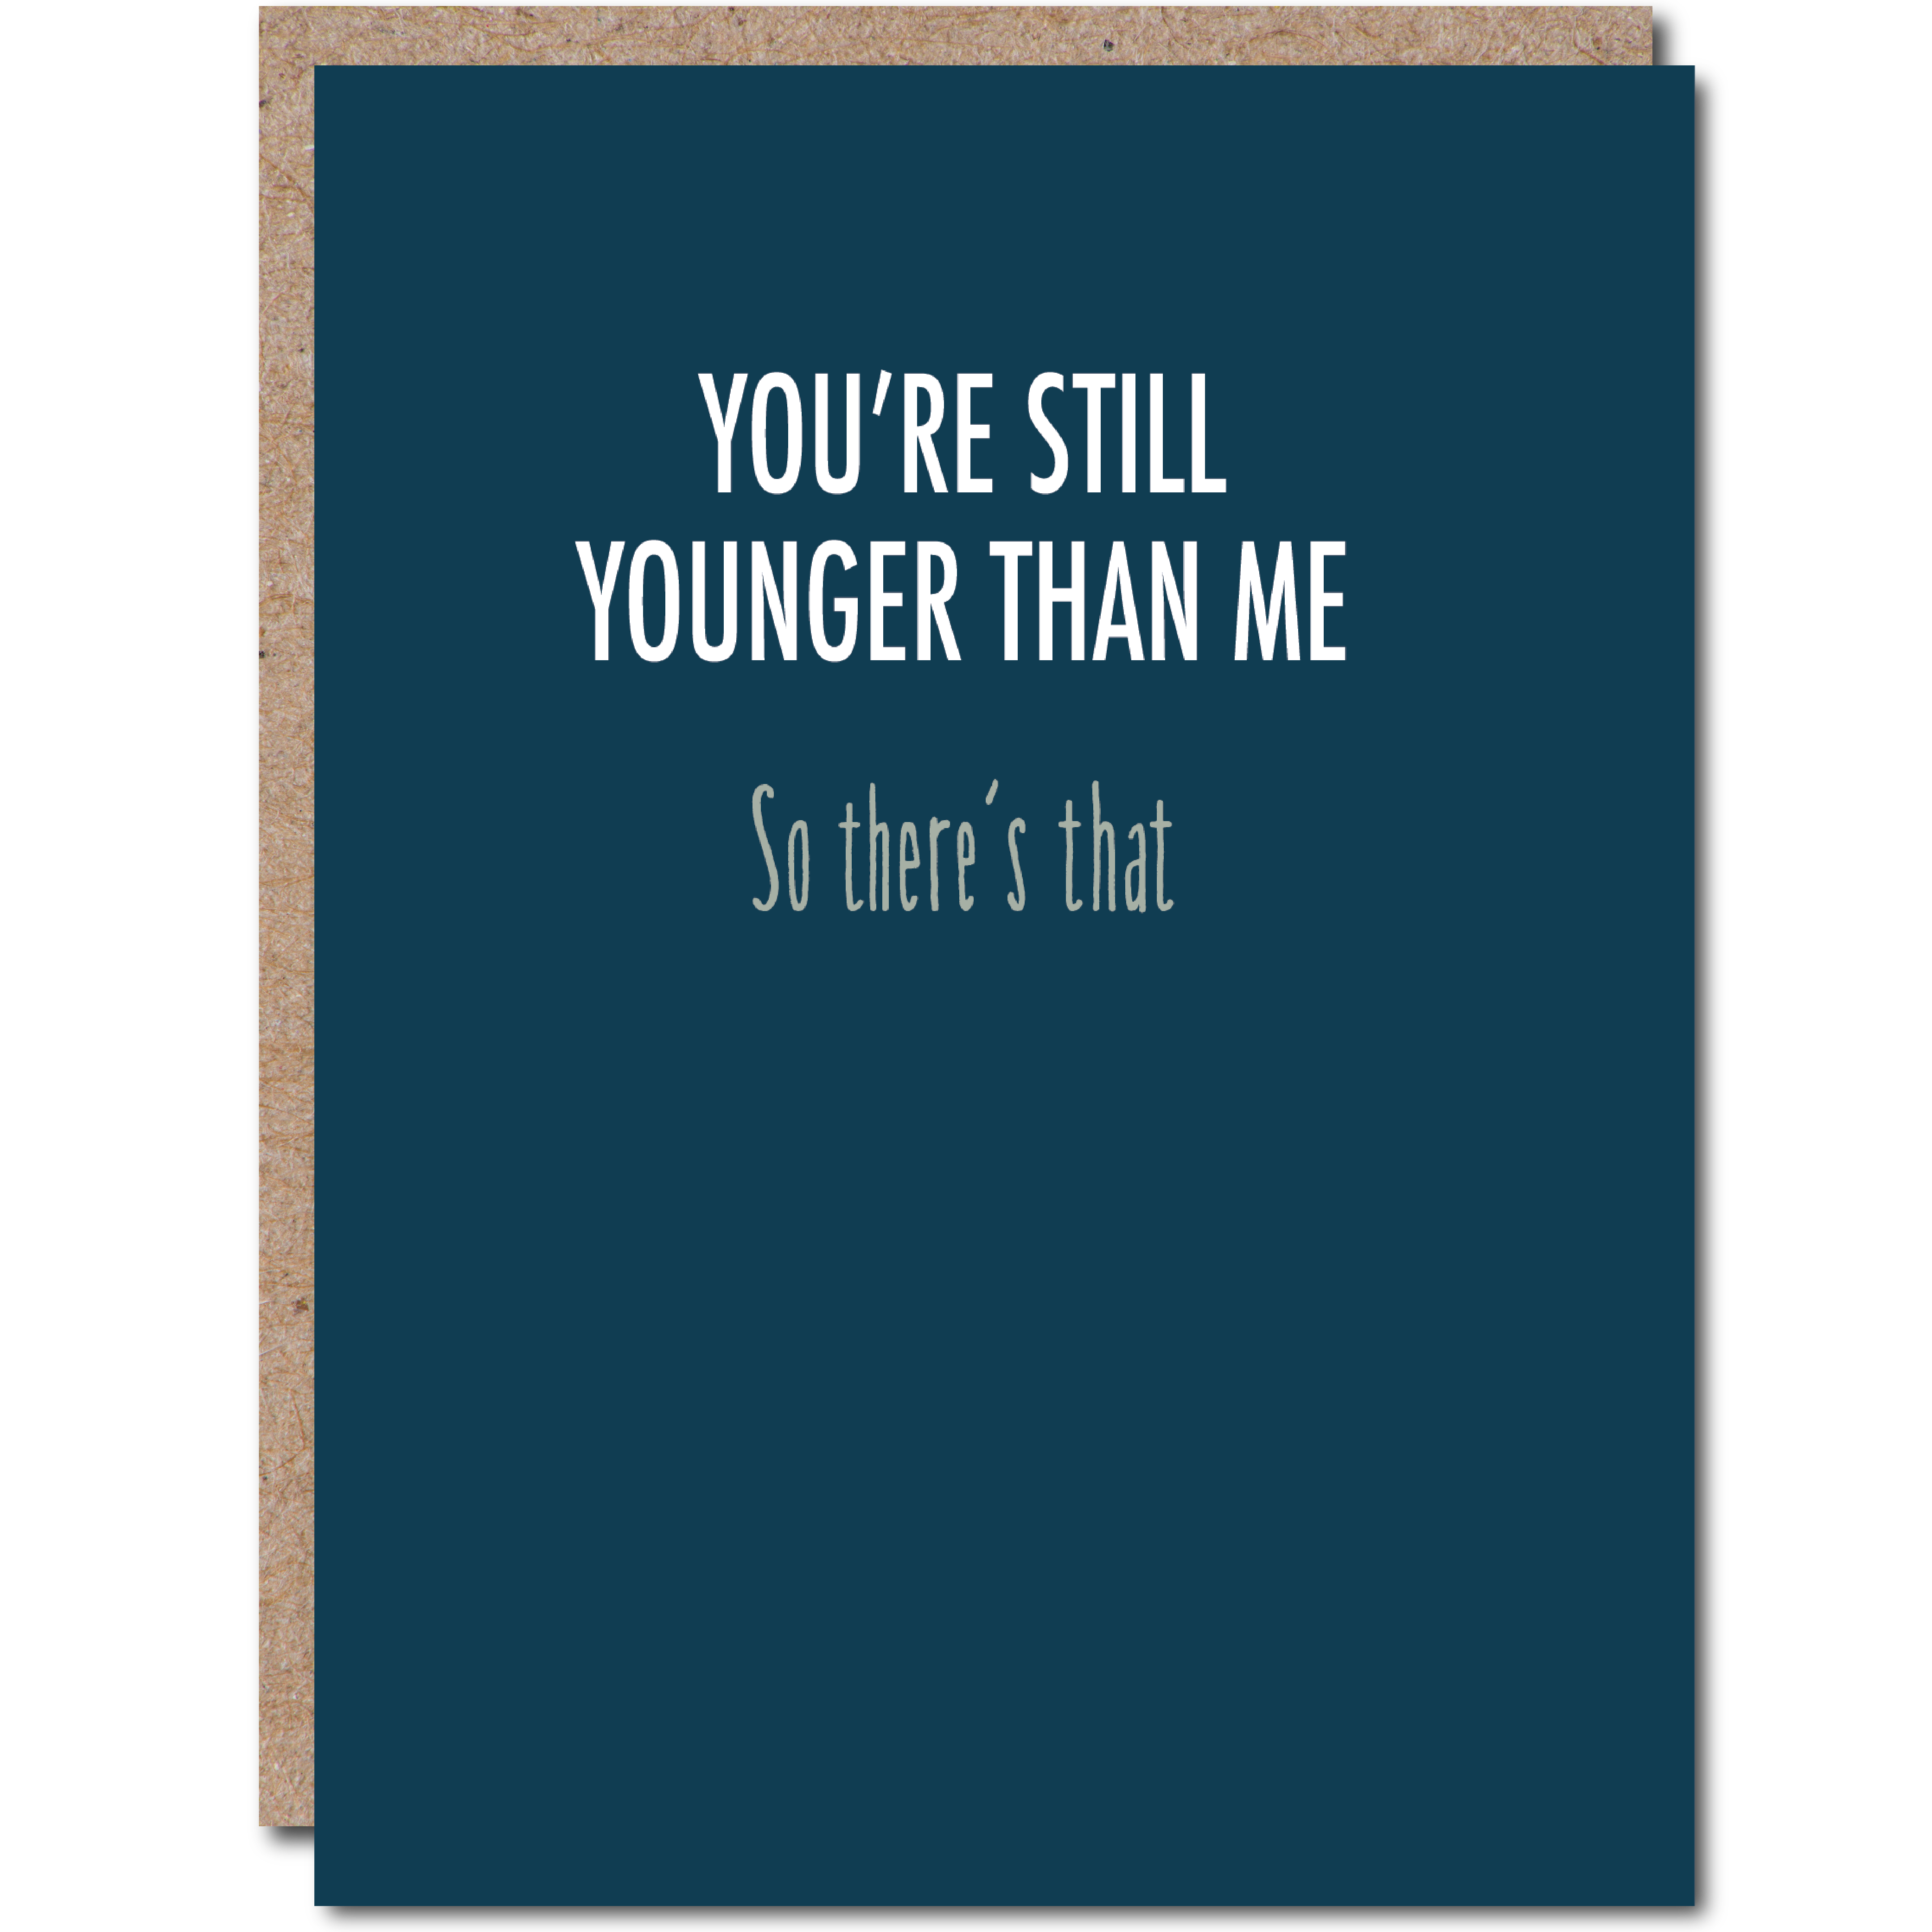 Dry Wit Paper Co - You're Still Younger Than Me. So There's That